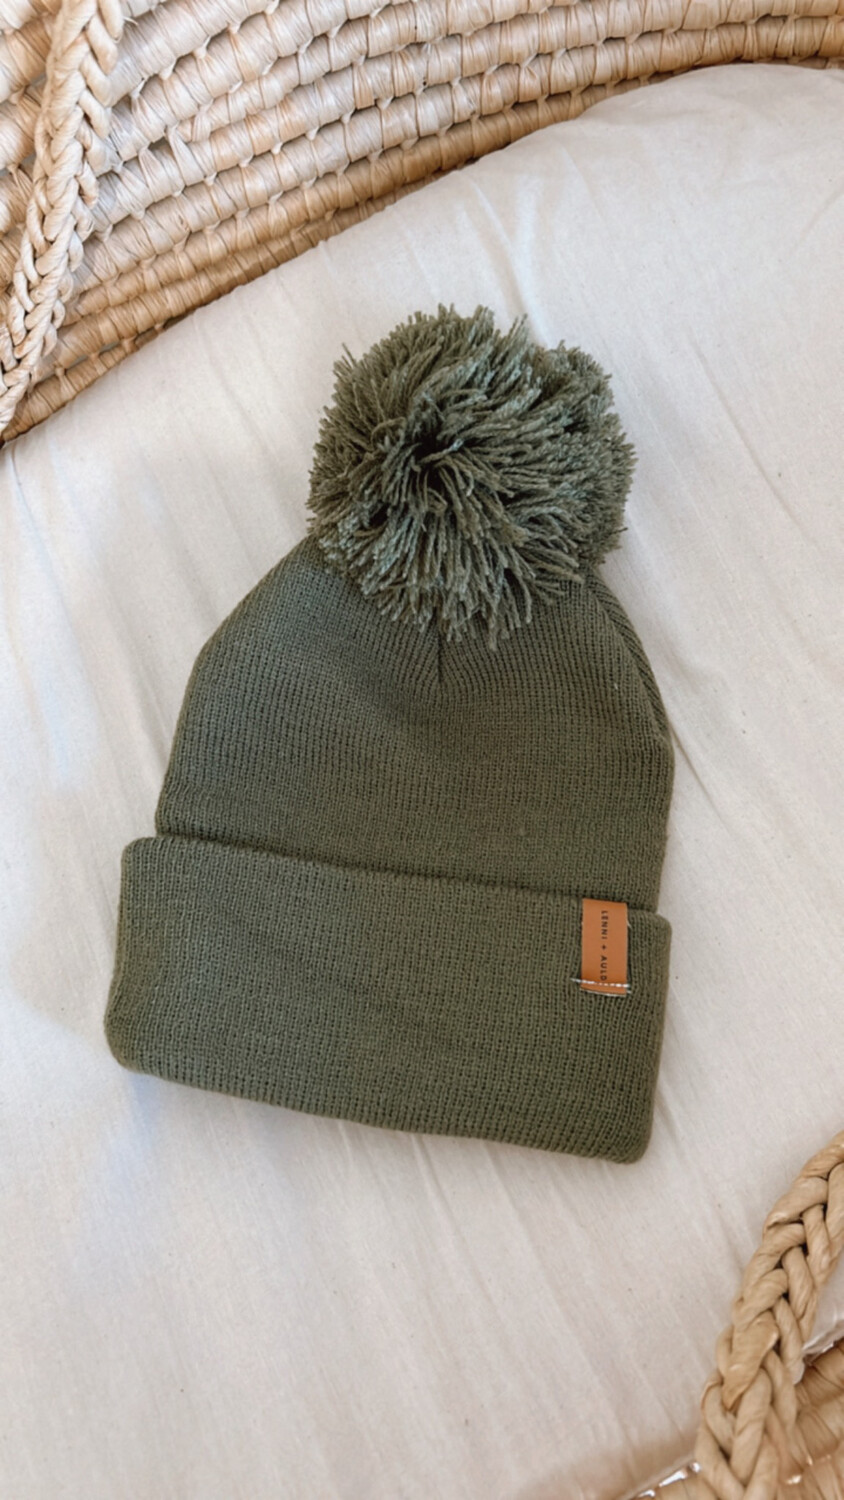 Winter Hats (With Or Without Pom)